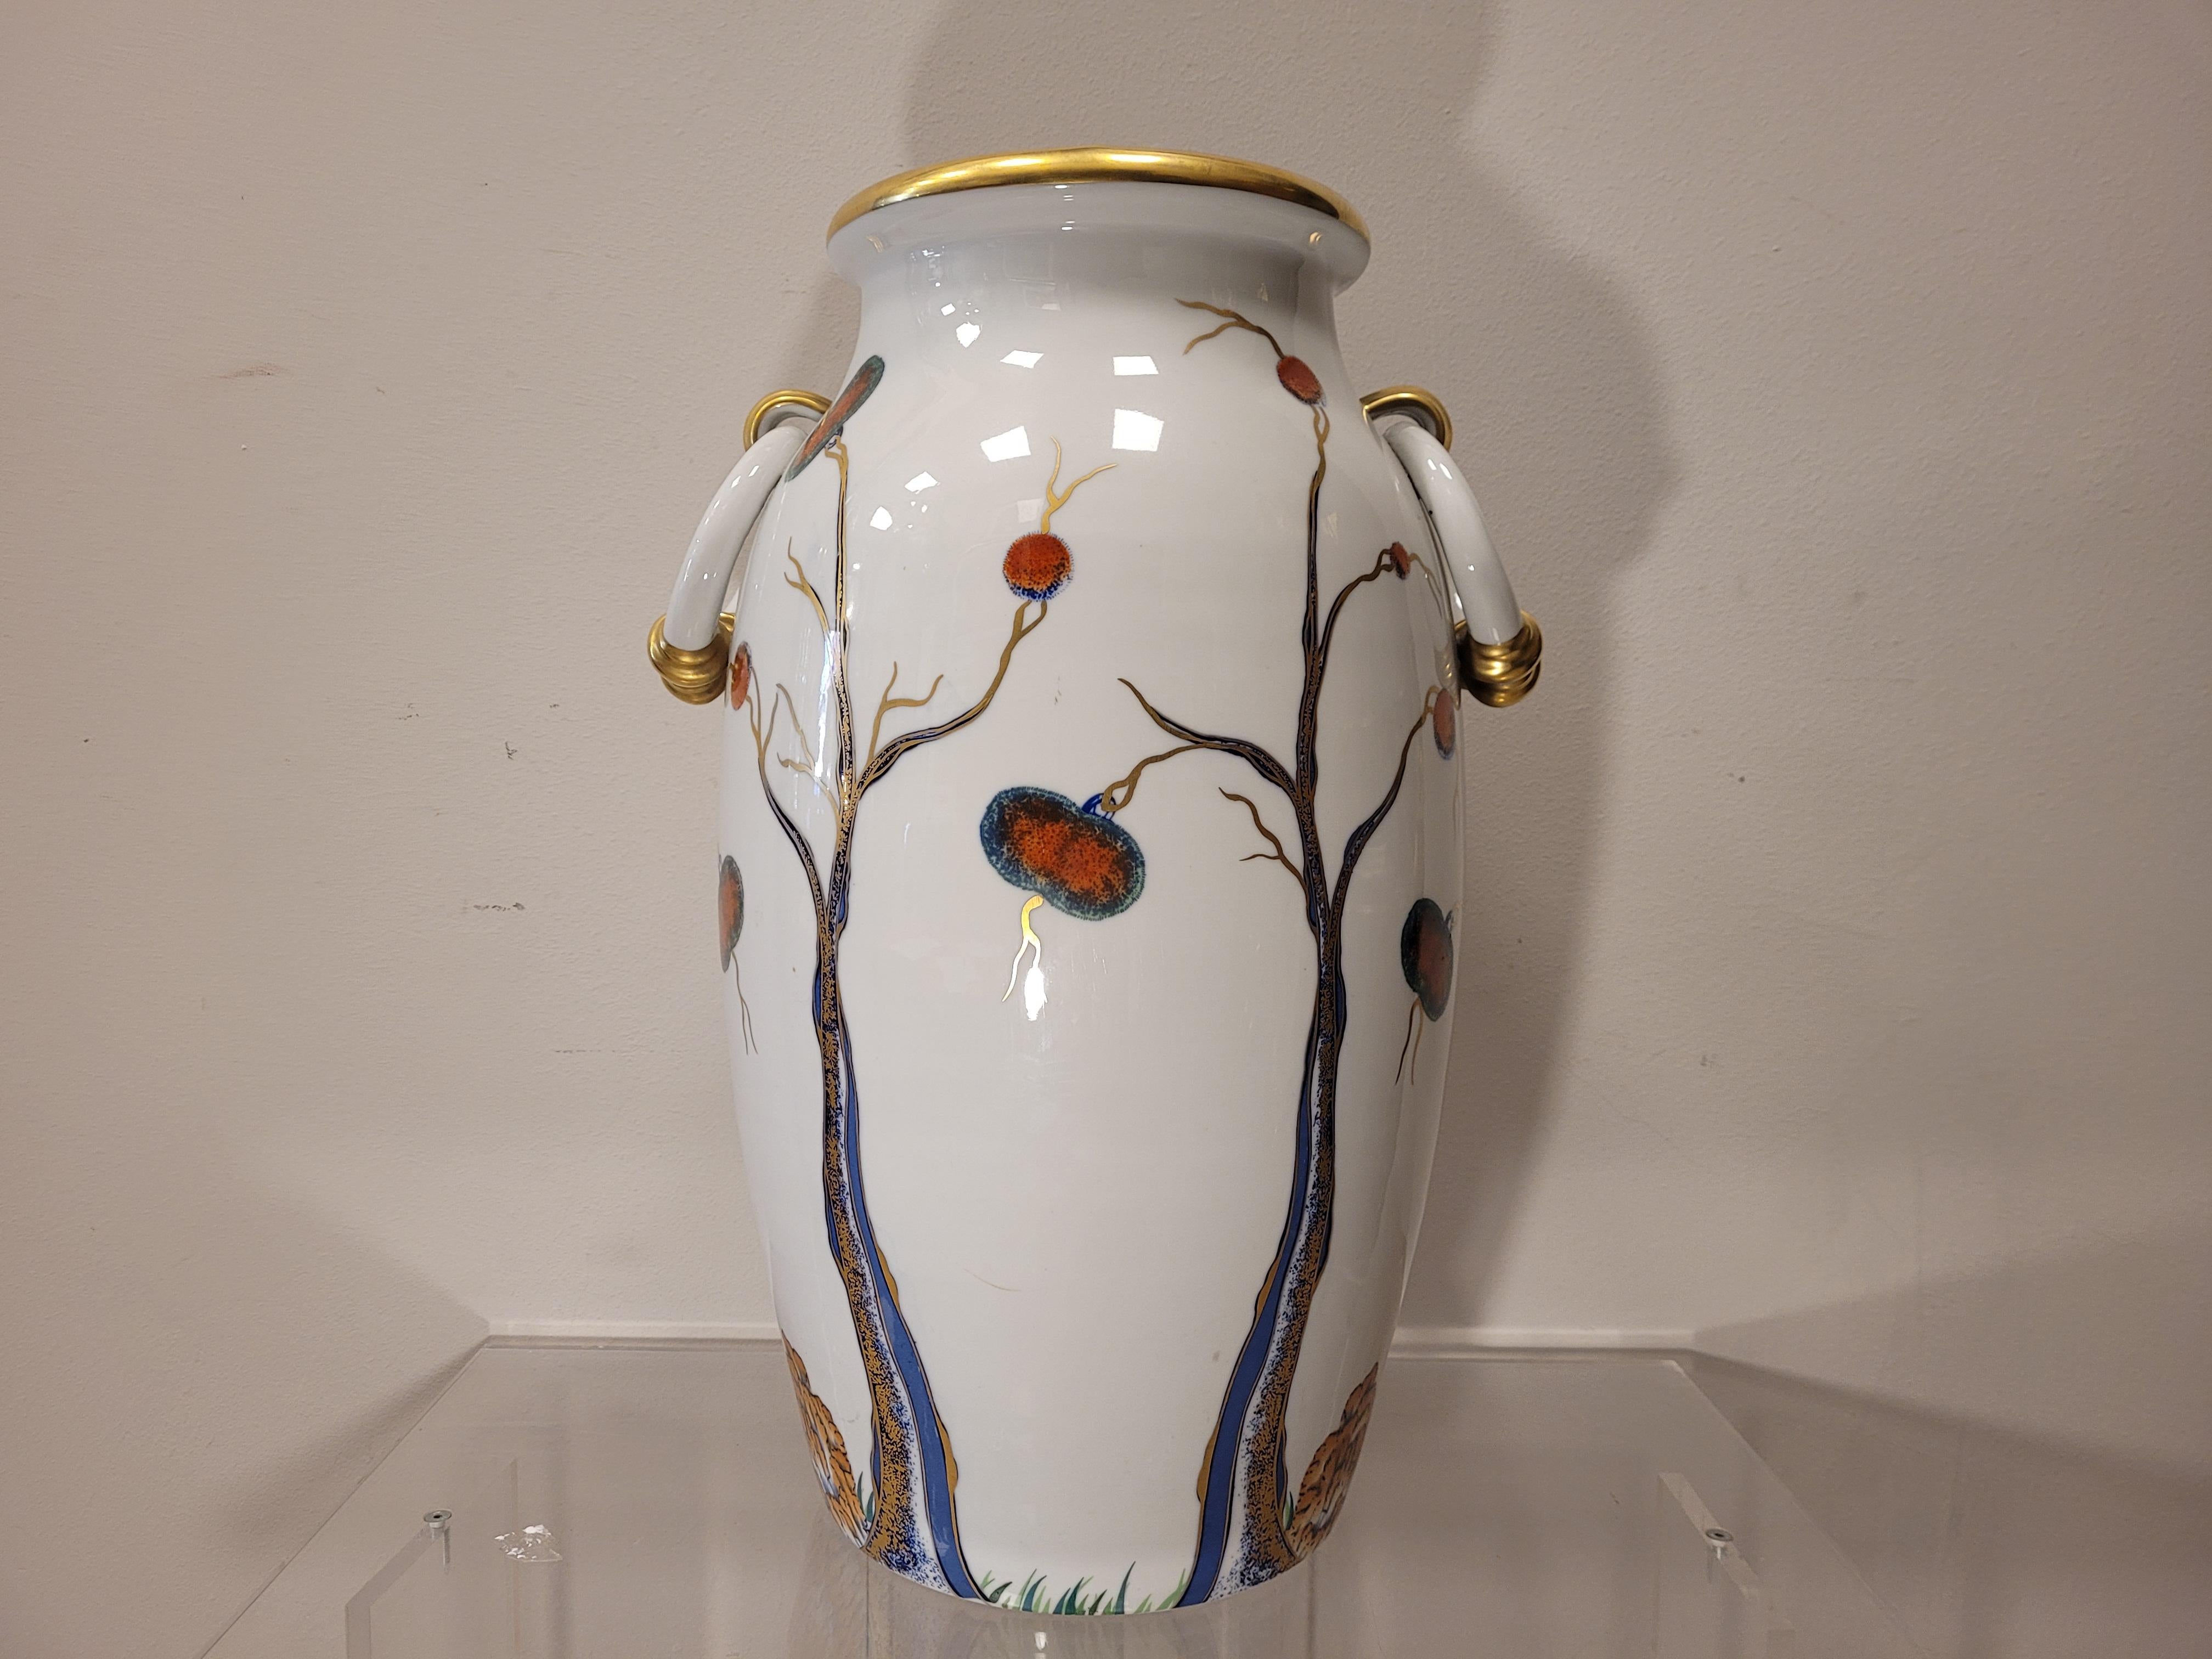 Gorgeous great porcelain vase by Mangani, Florence, Italy, hand-painted with chinoiseries and gold .This pattern can be seen in the Mangani Museum as an iconic model !!!
In a perfect condition 
At the end of the 19th century, the Mangani were a